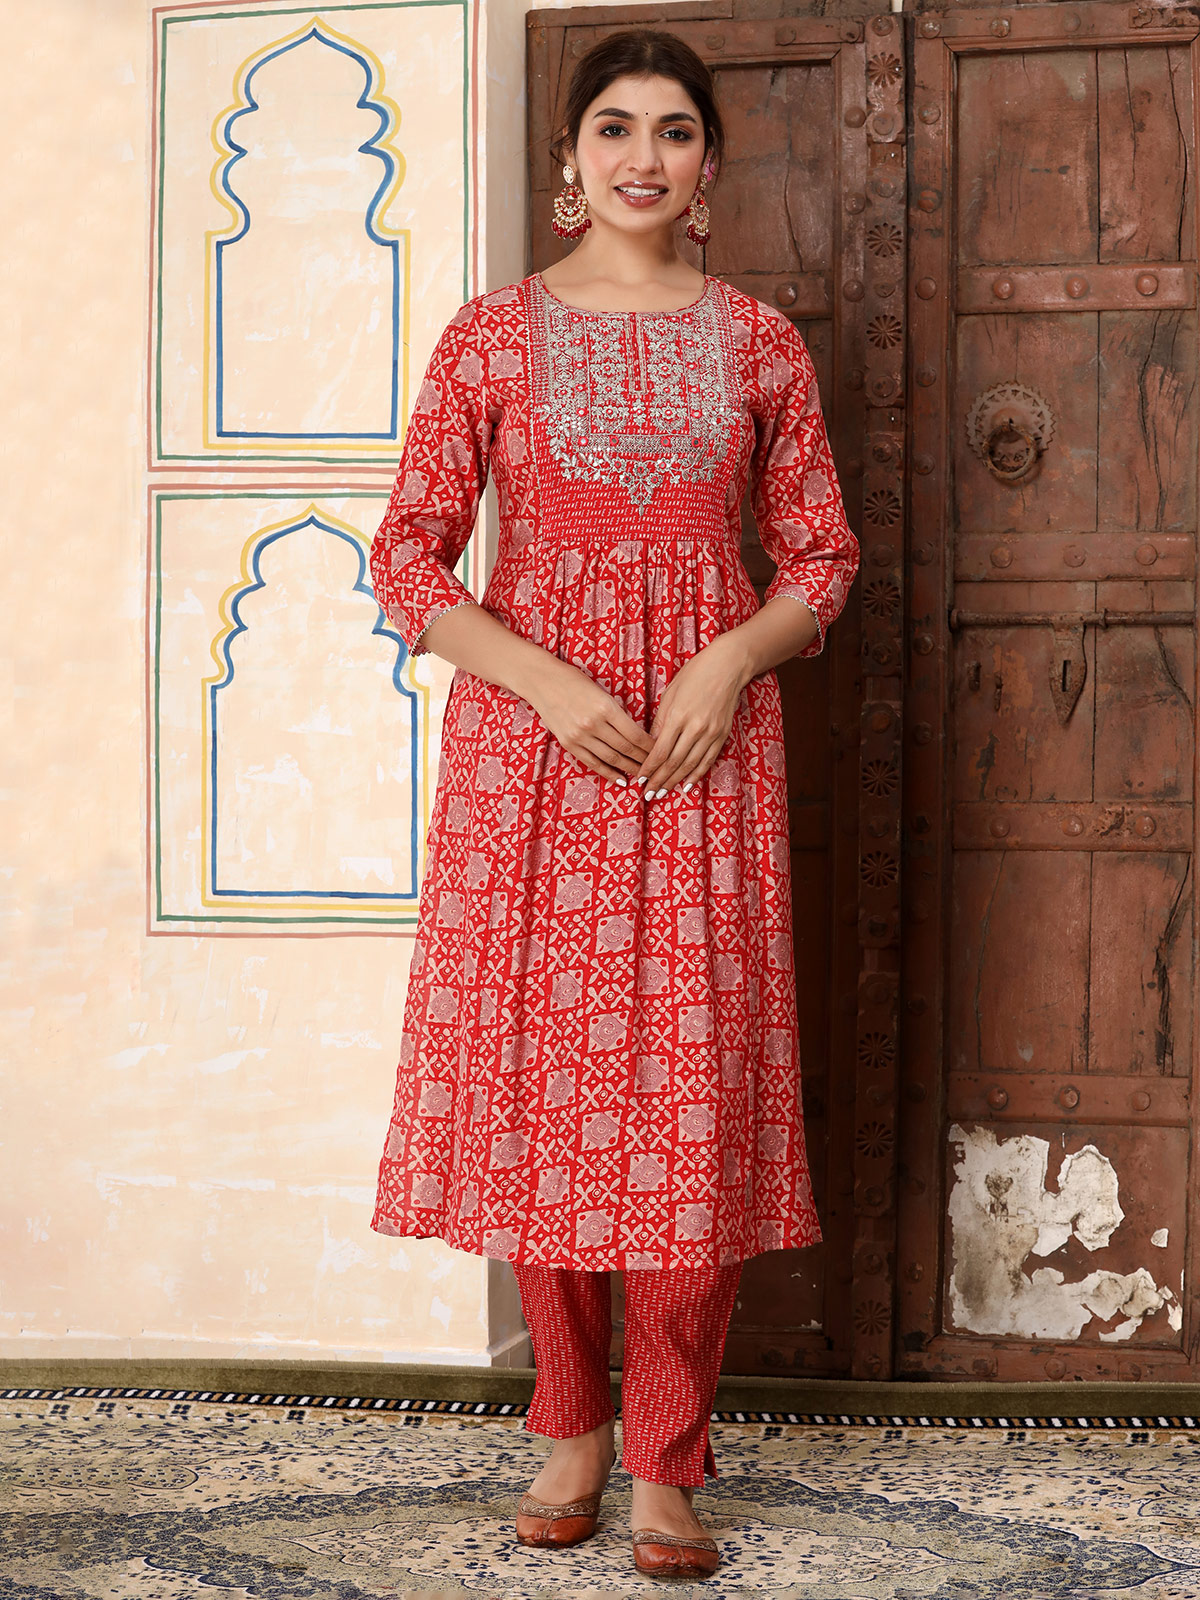 Discover 145+ red and white kurti set best